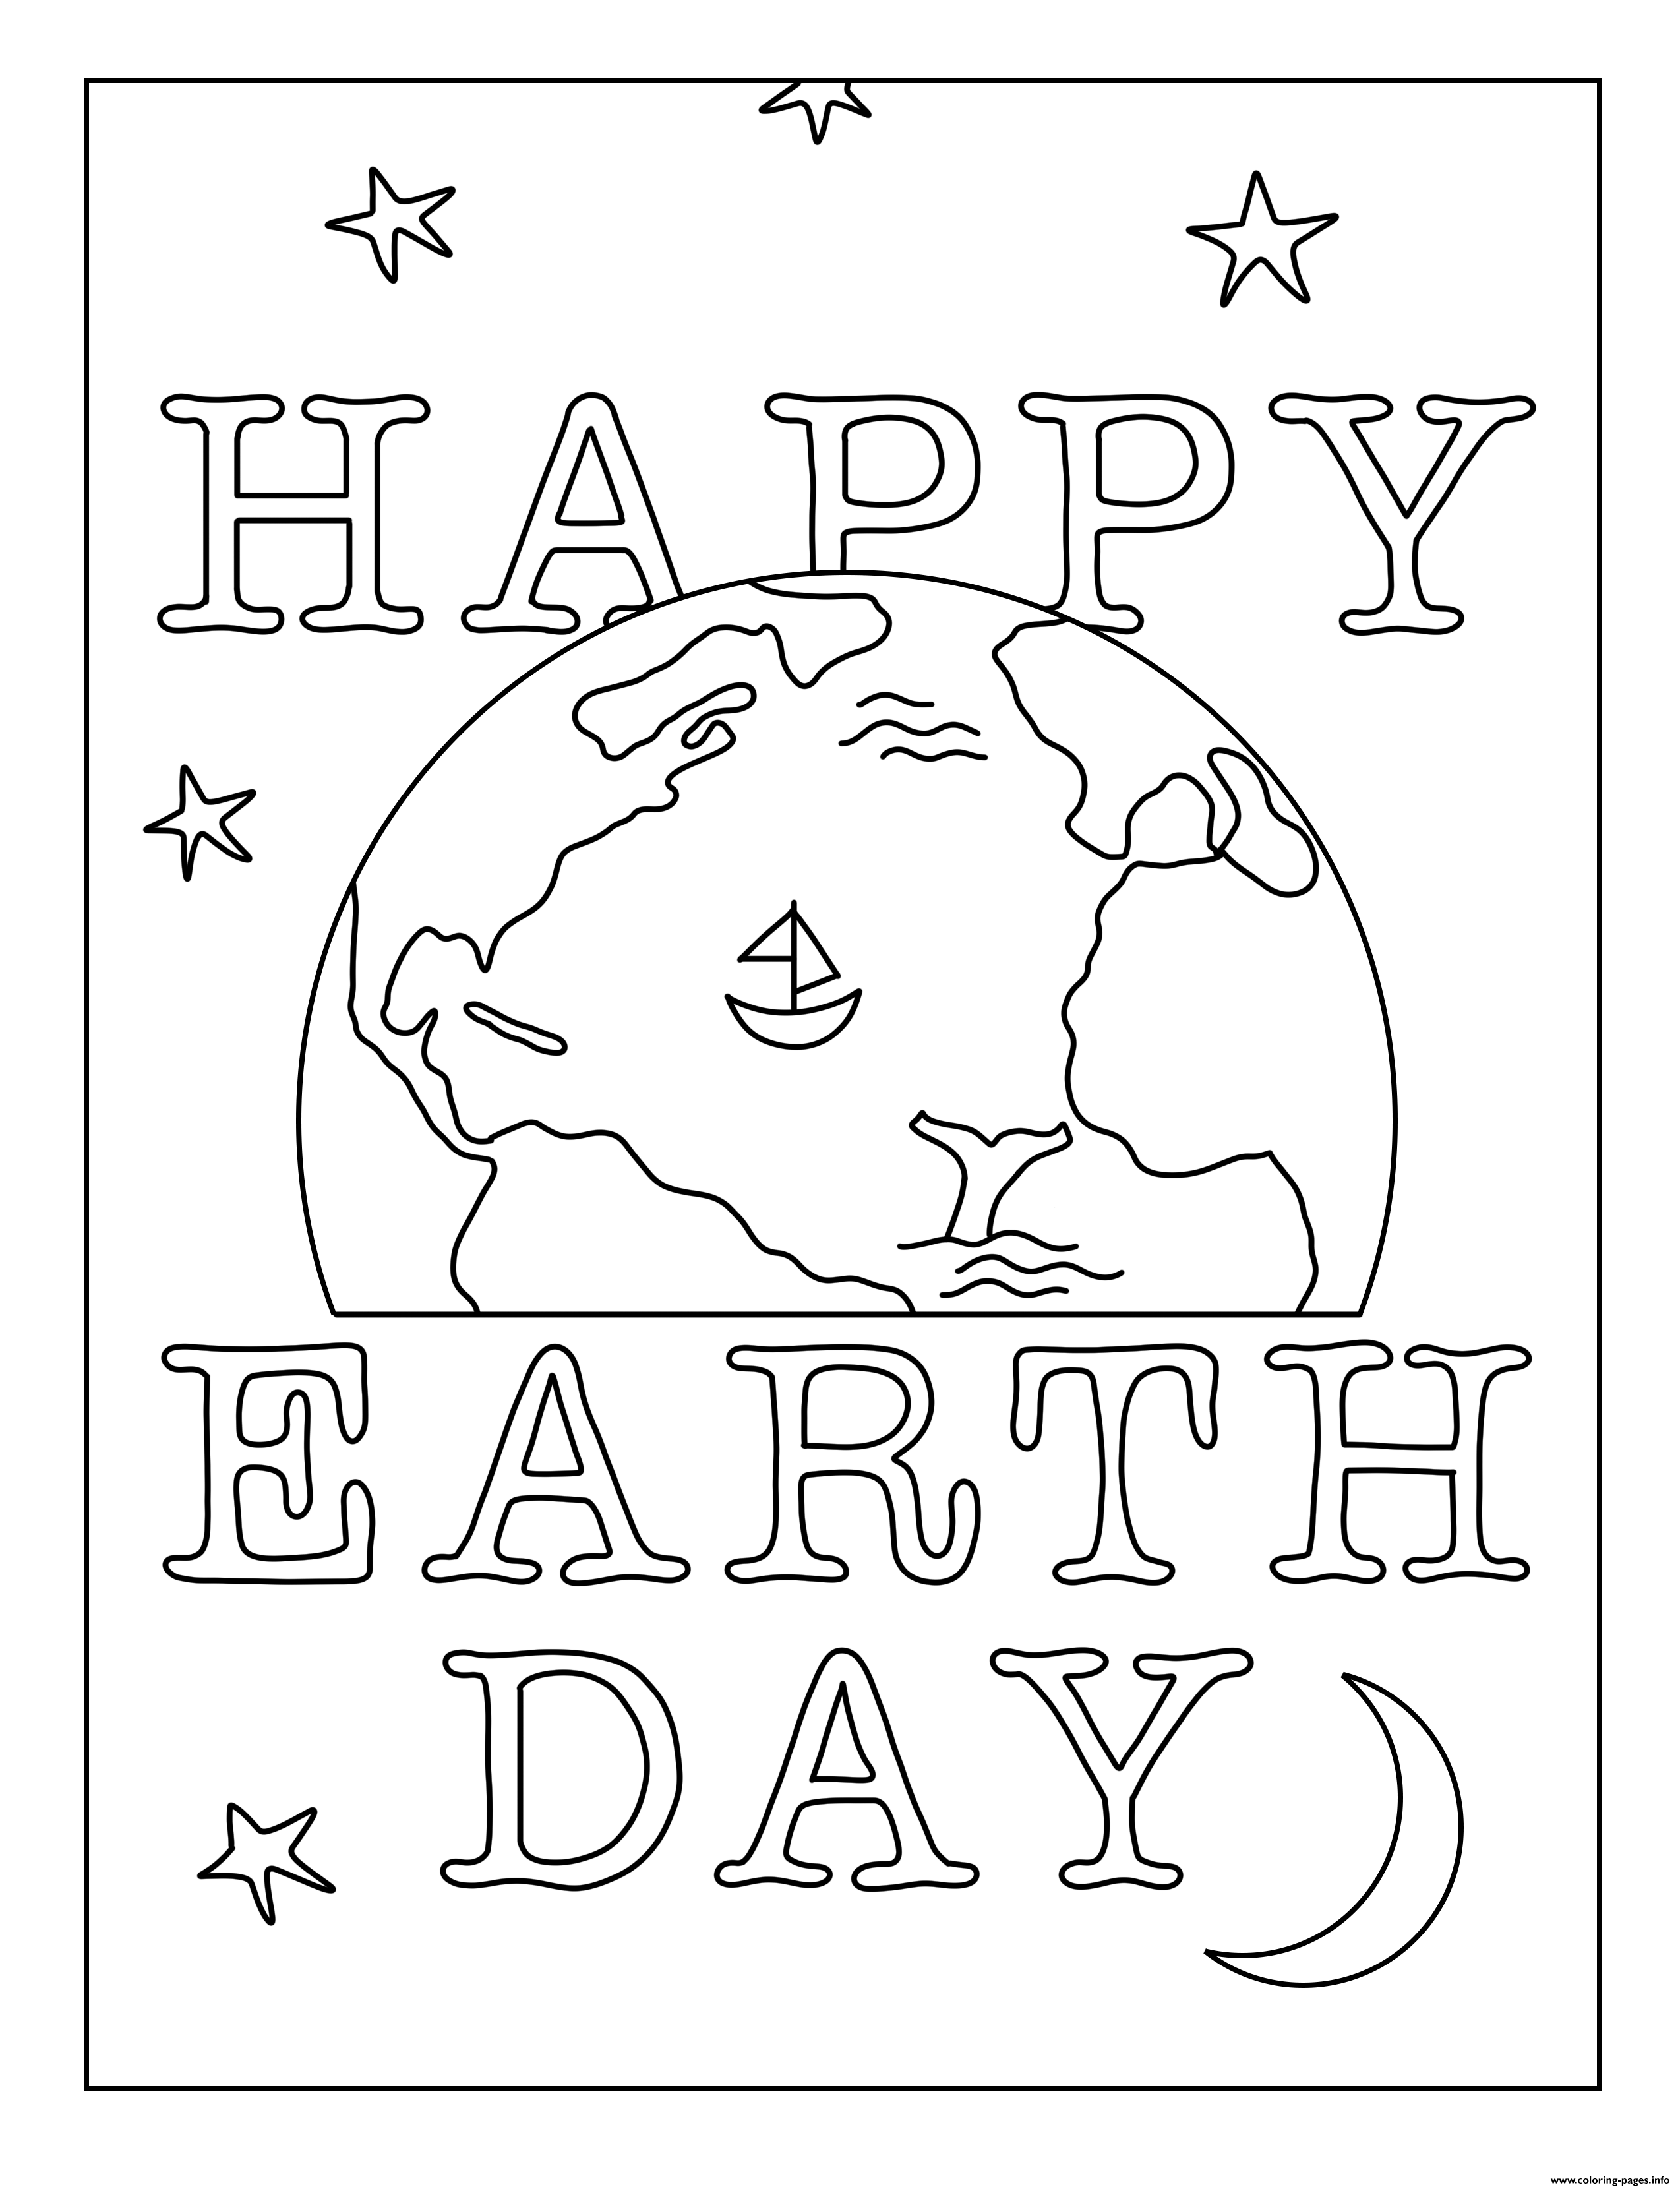 Happy Earth Day Everyone coloring